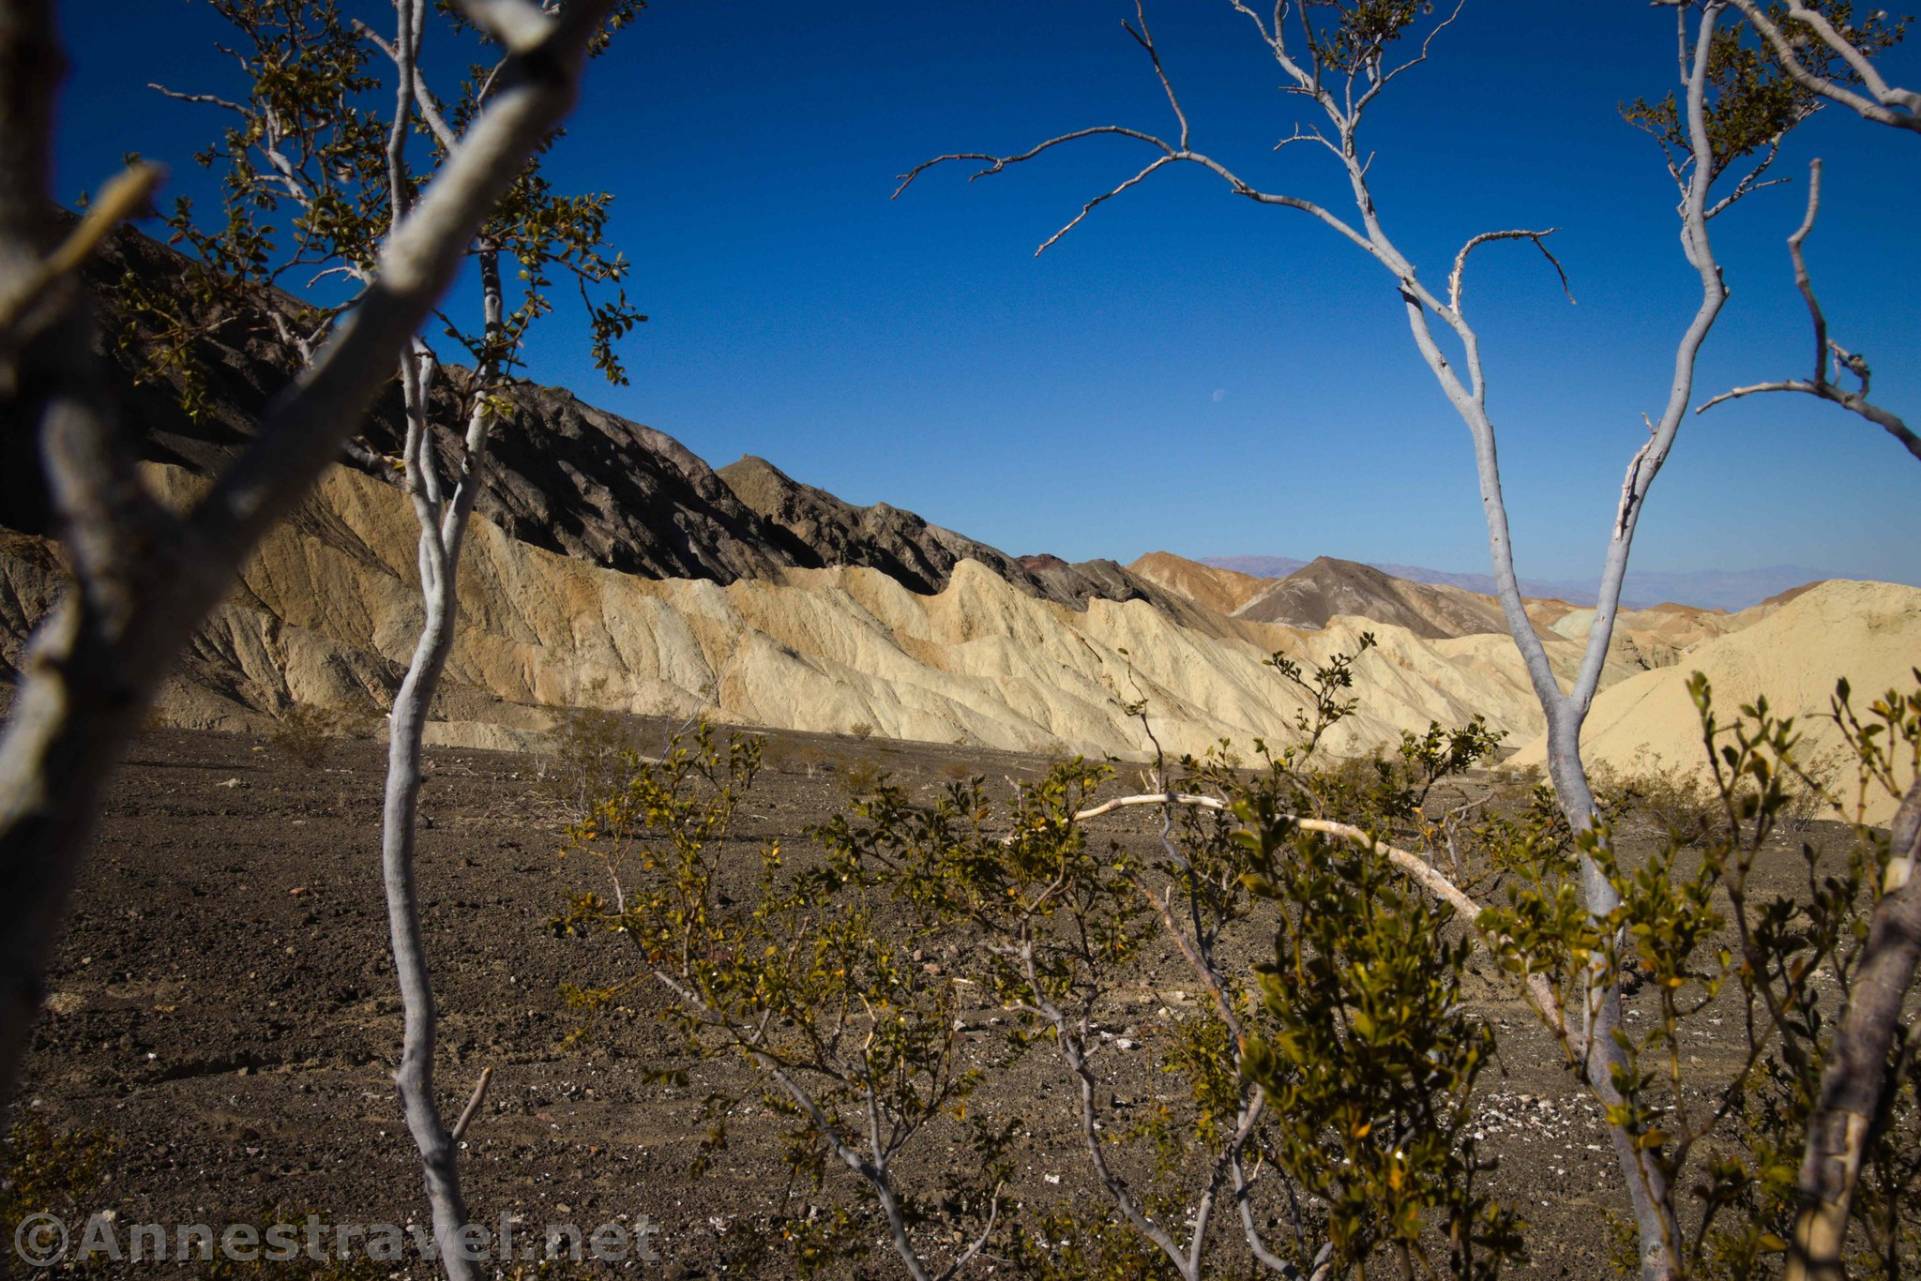 The top of 20 Mule Team Canyon, Death Valley National Park, California